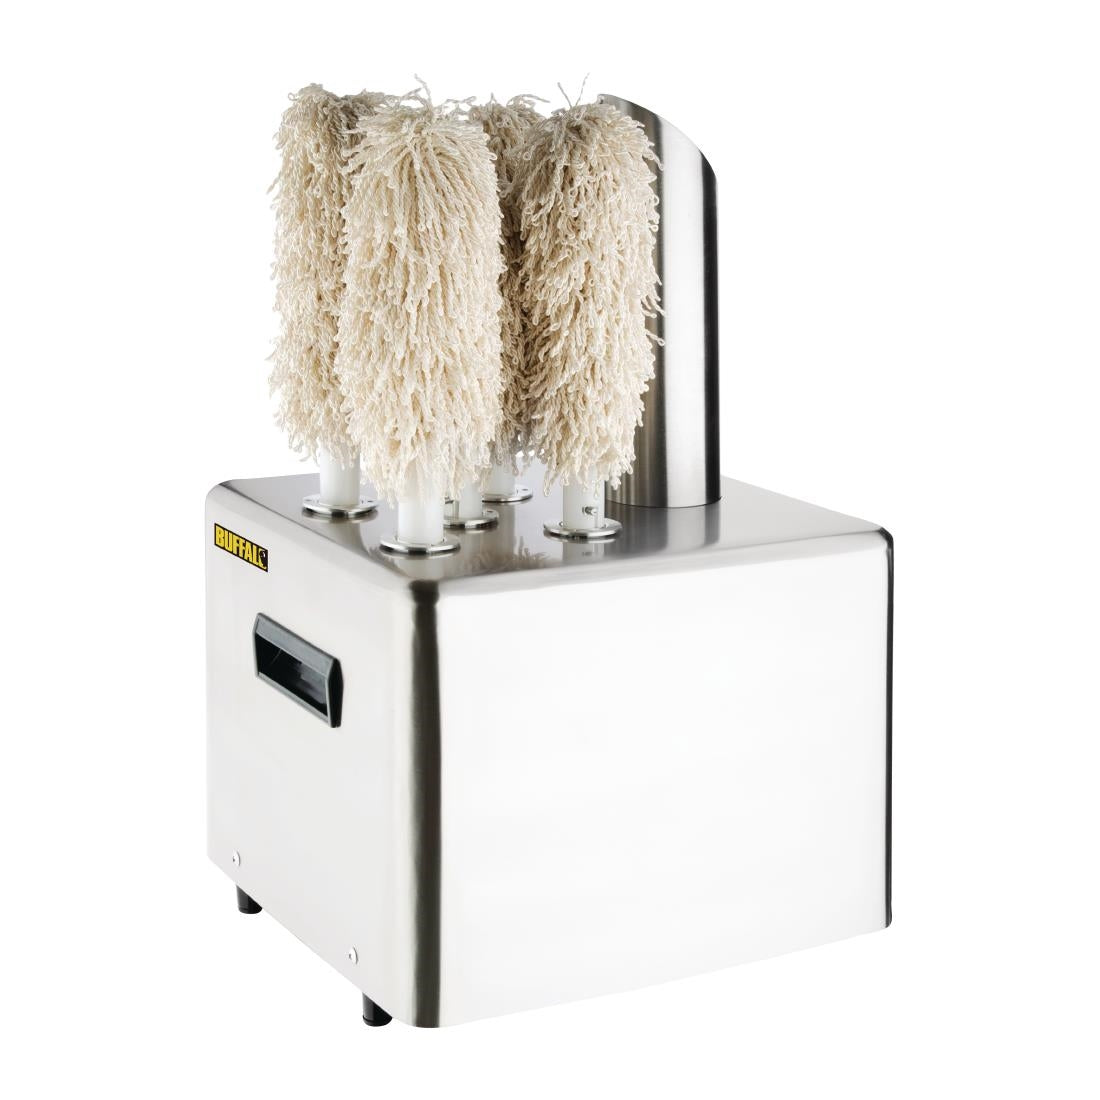 FA118 Buffalo Commercial Glass Polisher JD Catering Equipment Solutions Ltd